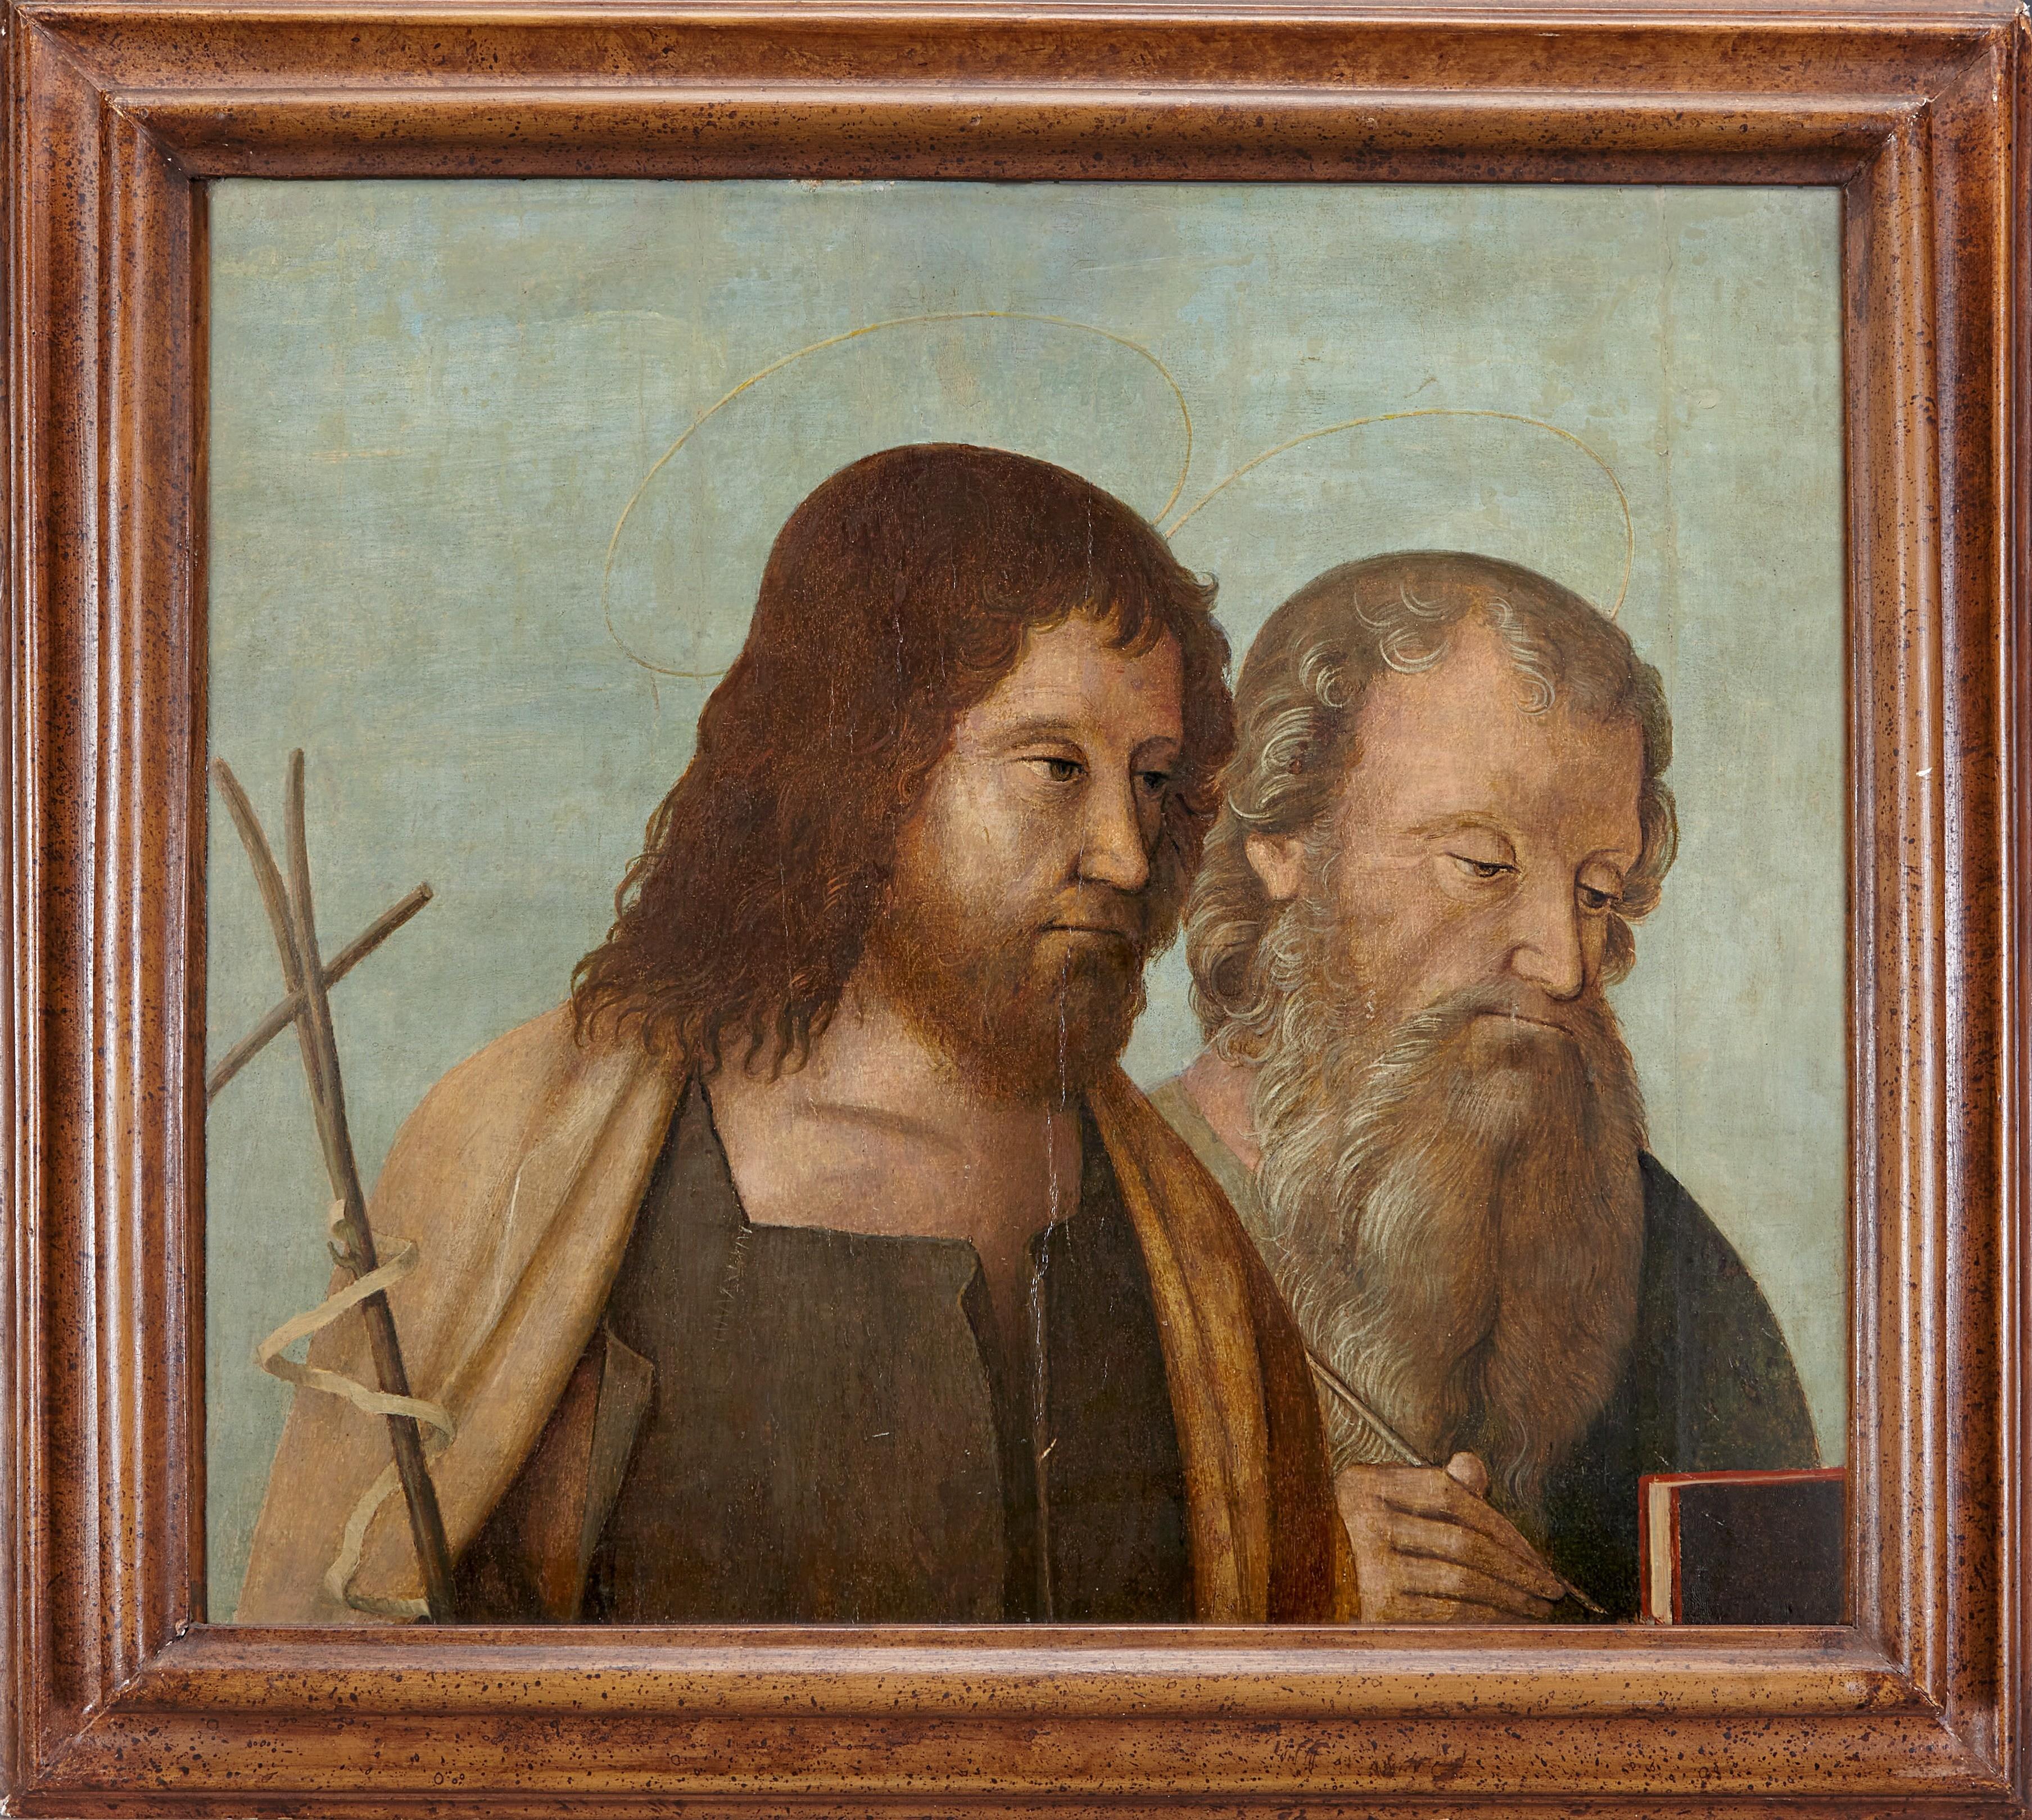 Venetian school, early 16th century

Oil on panel, 49 x 56 cm.
Framed (restorations)

These two panel paintings, portraying John the Baptist and Saint Jerome on one panel, and Saints Peter and Paul on the other panel, are likely fragments of